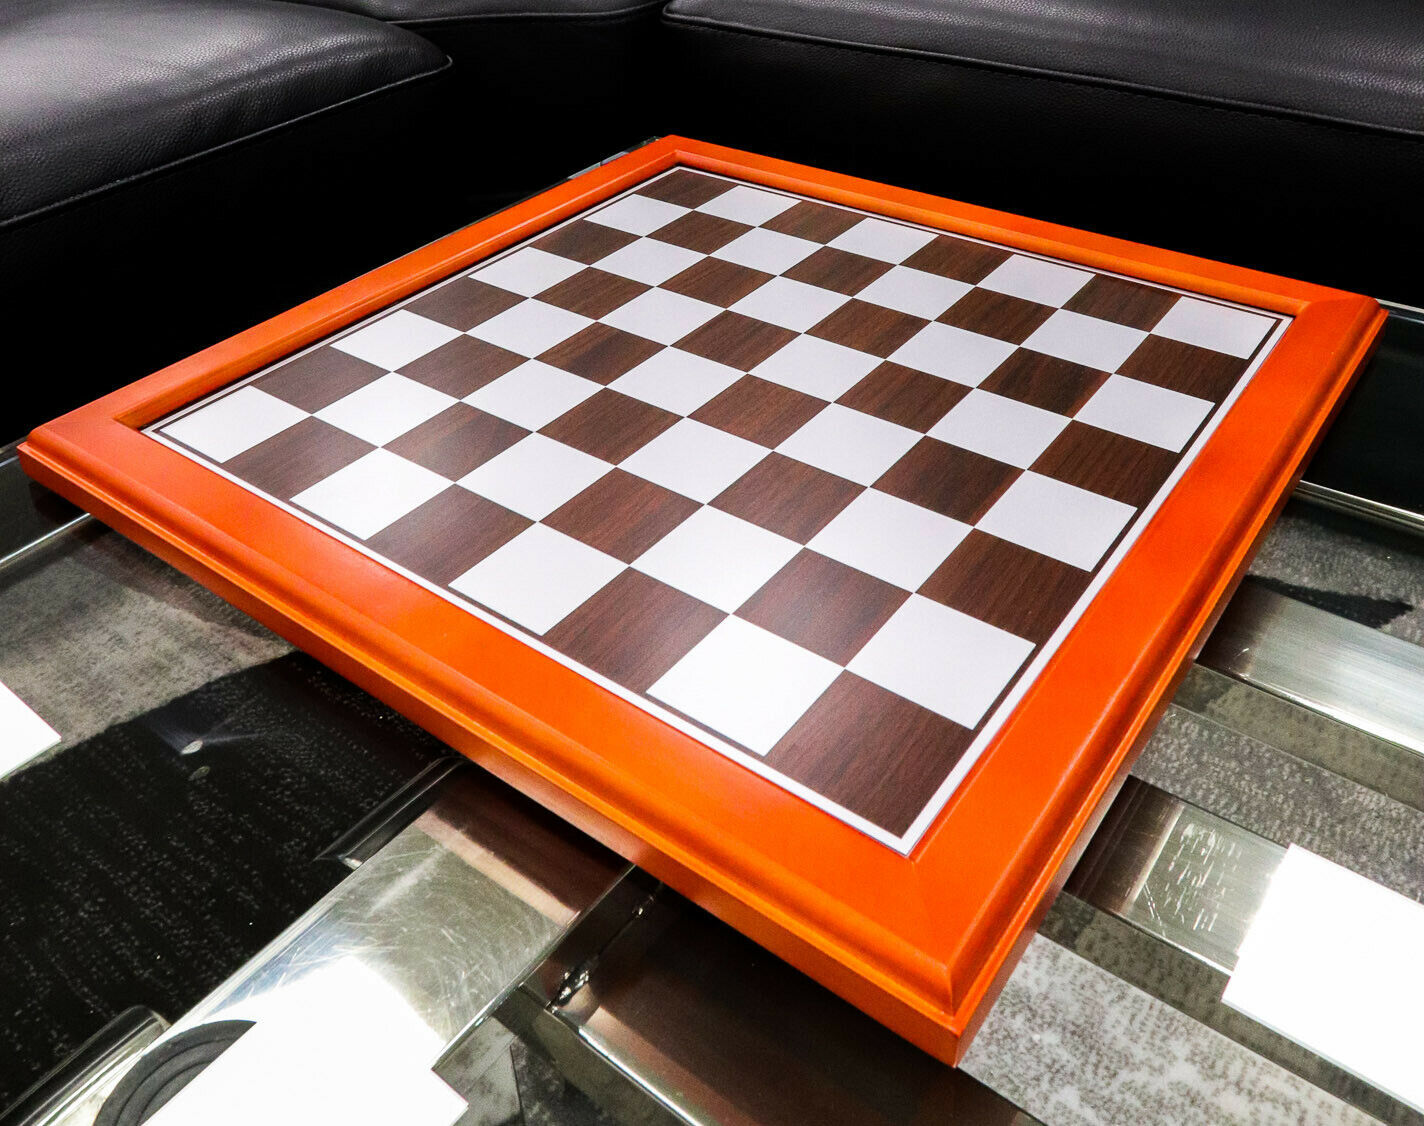 15"X15" Redwood Trim Chess Board With Black And Silver Silk Screen Inner Squares - $43.99